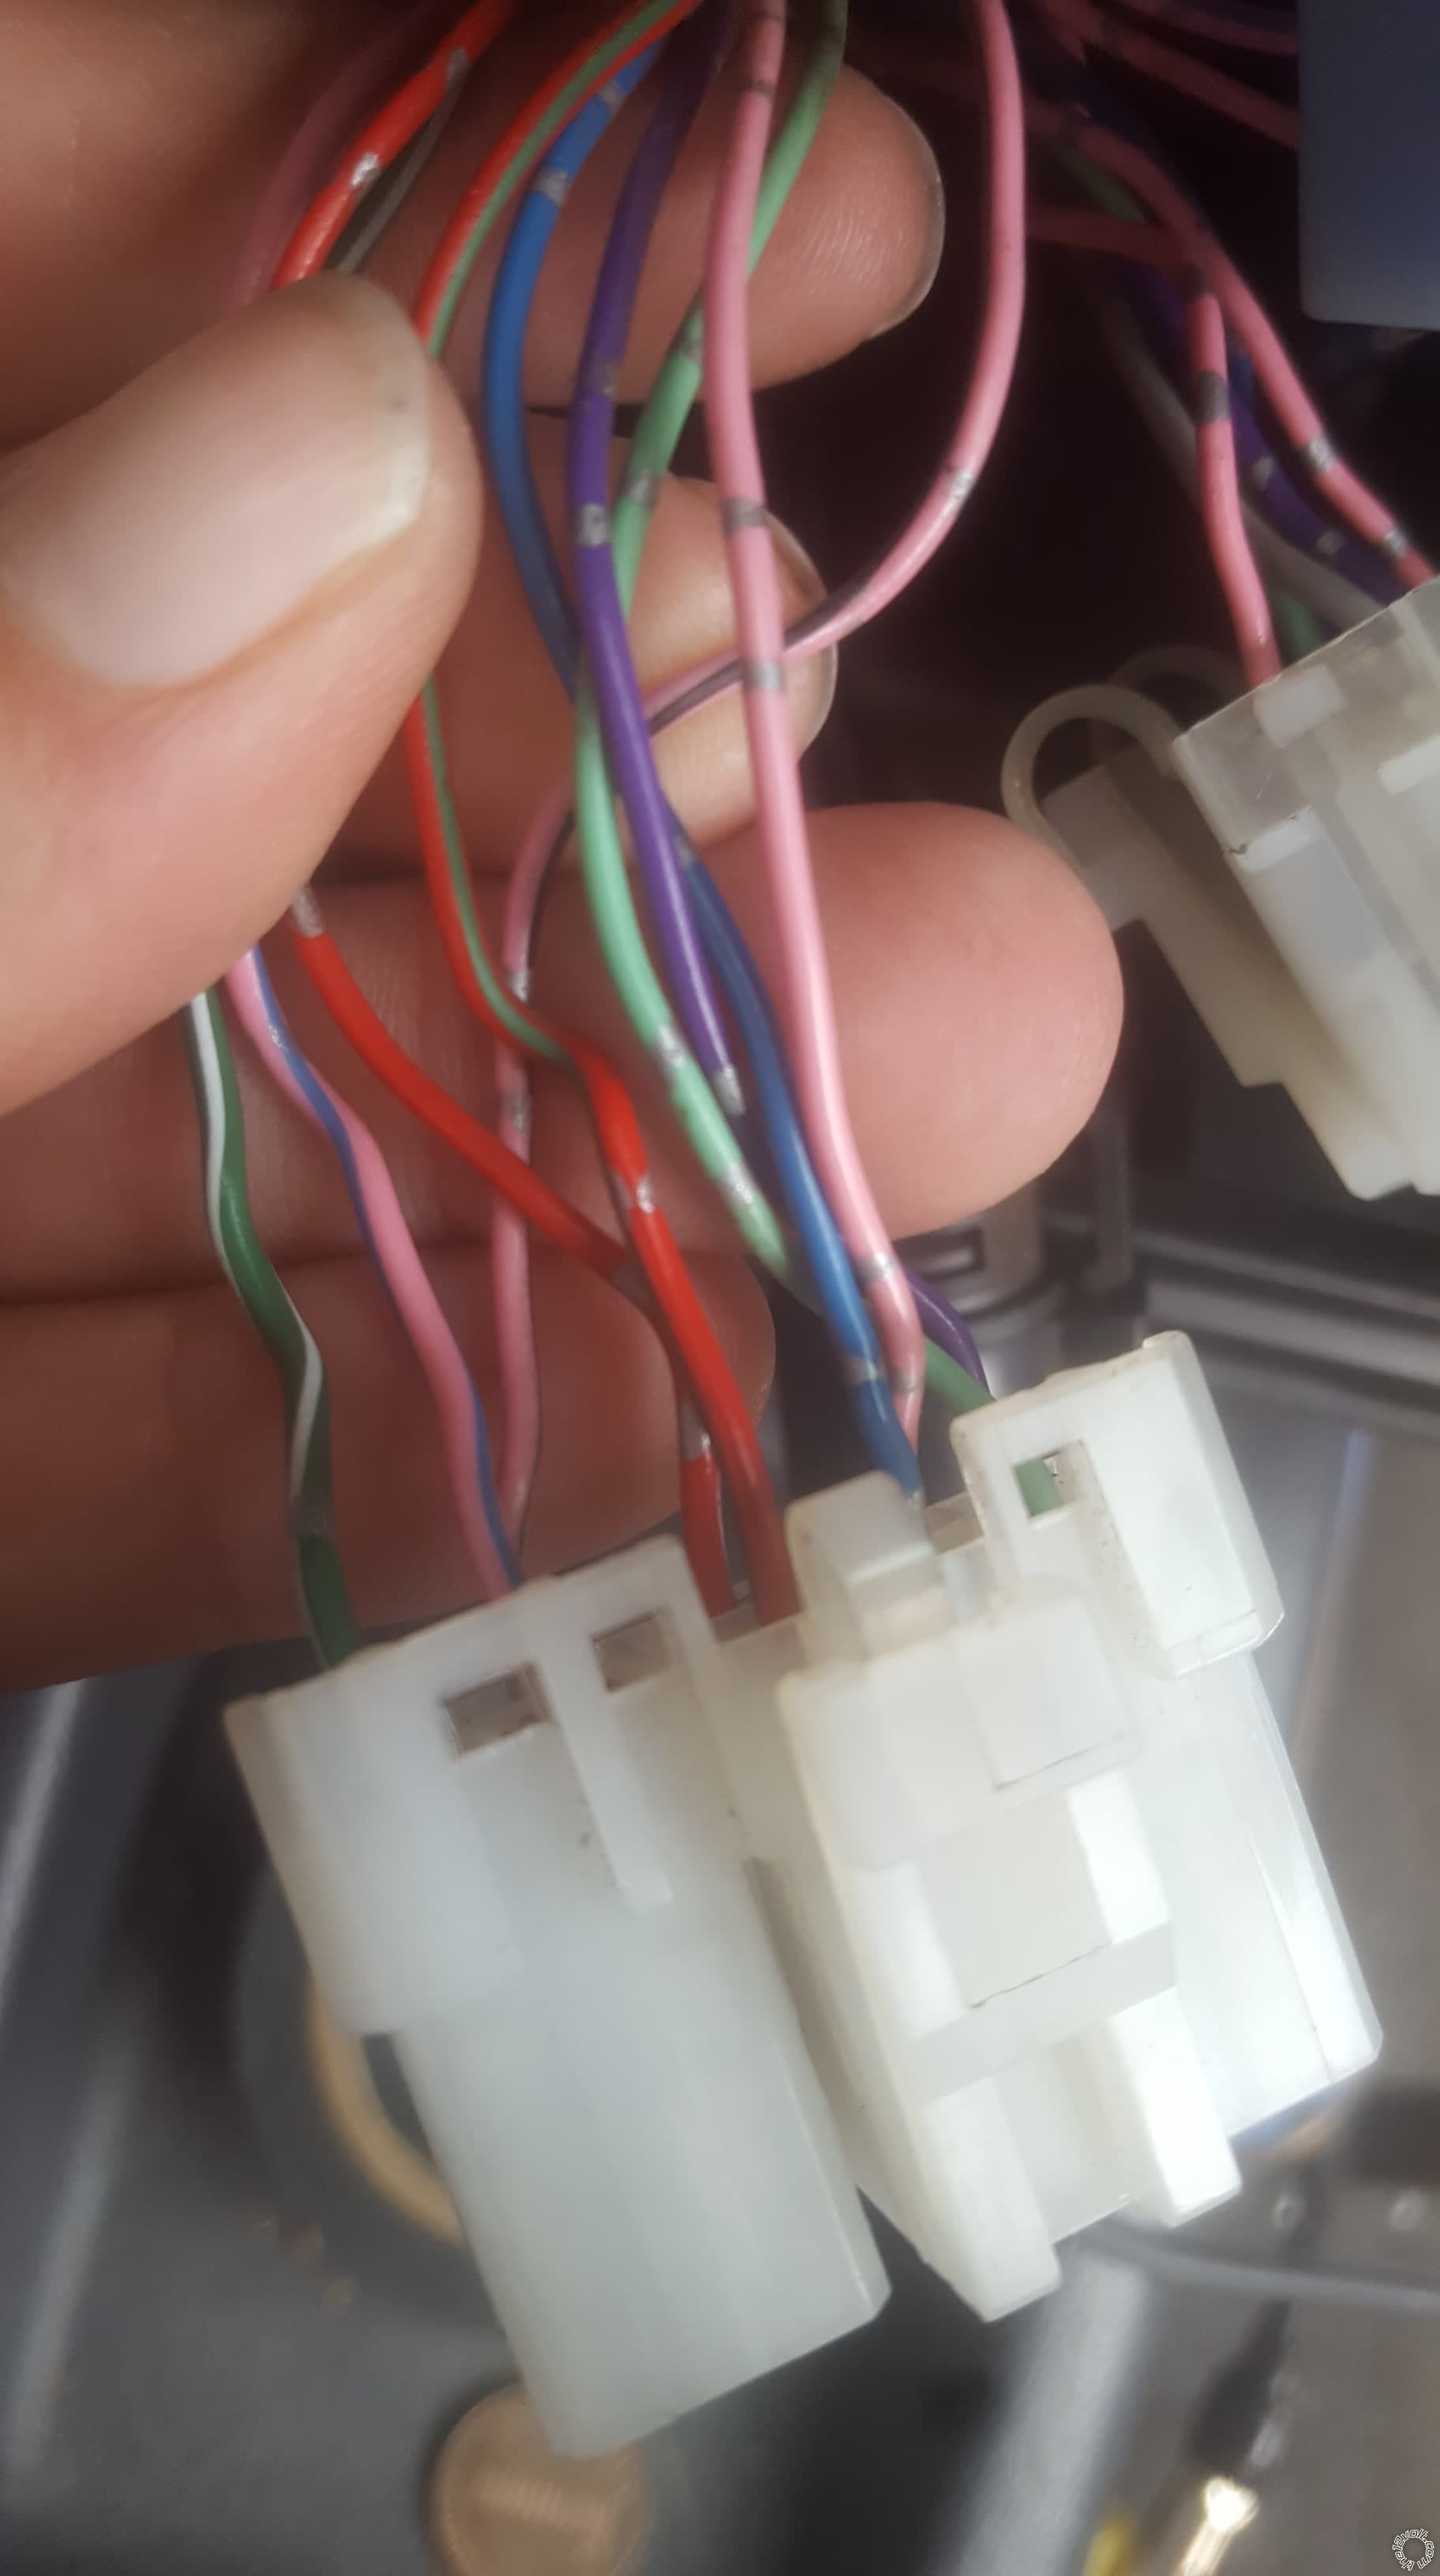 1995 Nissan Pathfinder Stereo Wiring -- posted image.